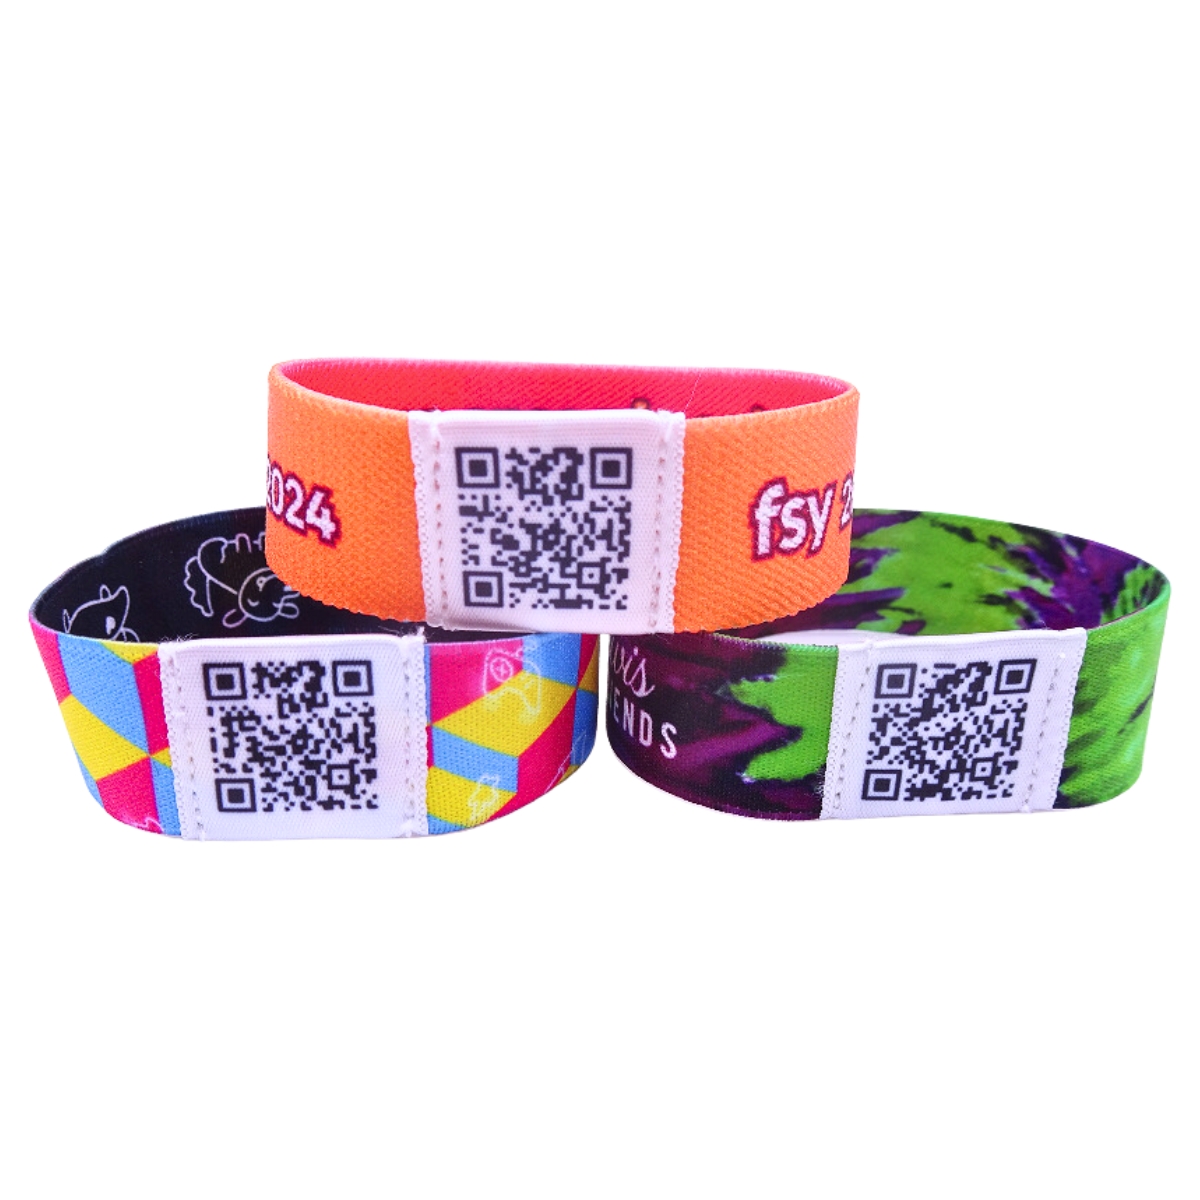 Elastic Wristband with QR Code